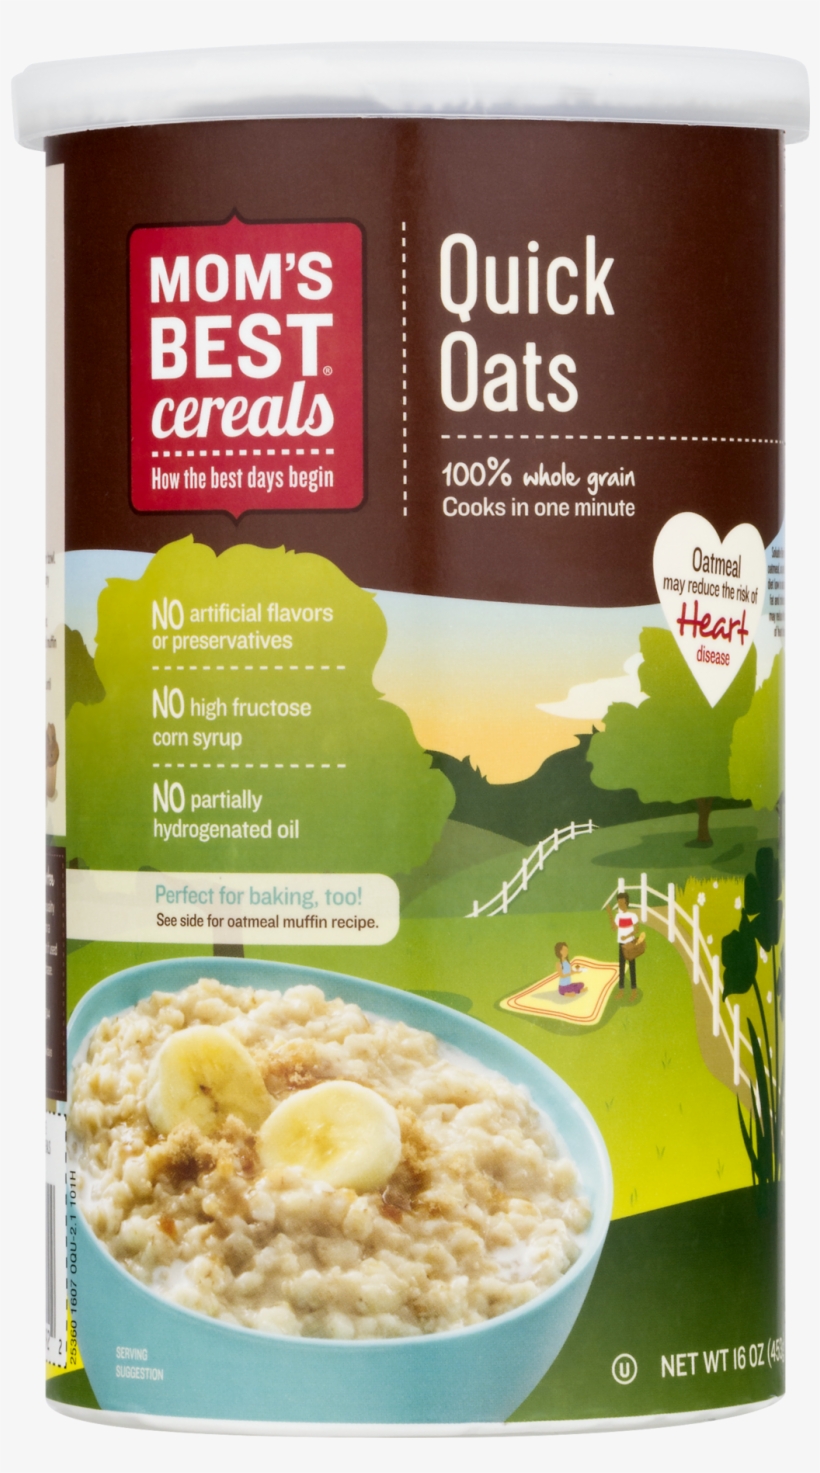 Mom's Best Cereals Quick Oats 42 Oz. Canister, transparent png #2820863